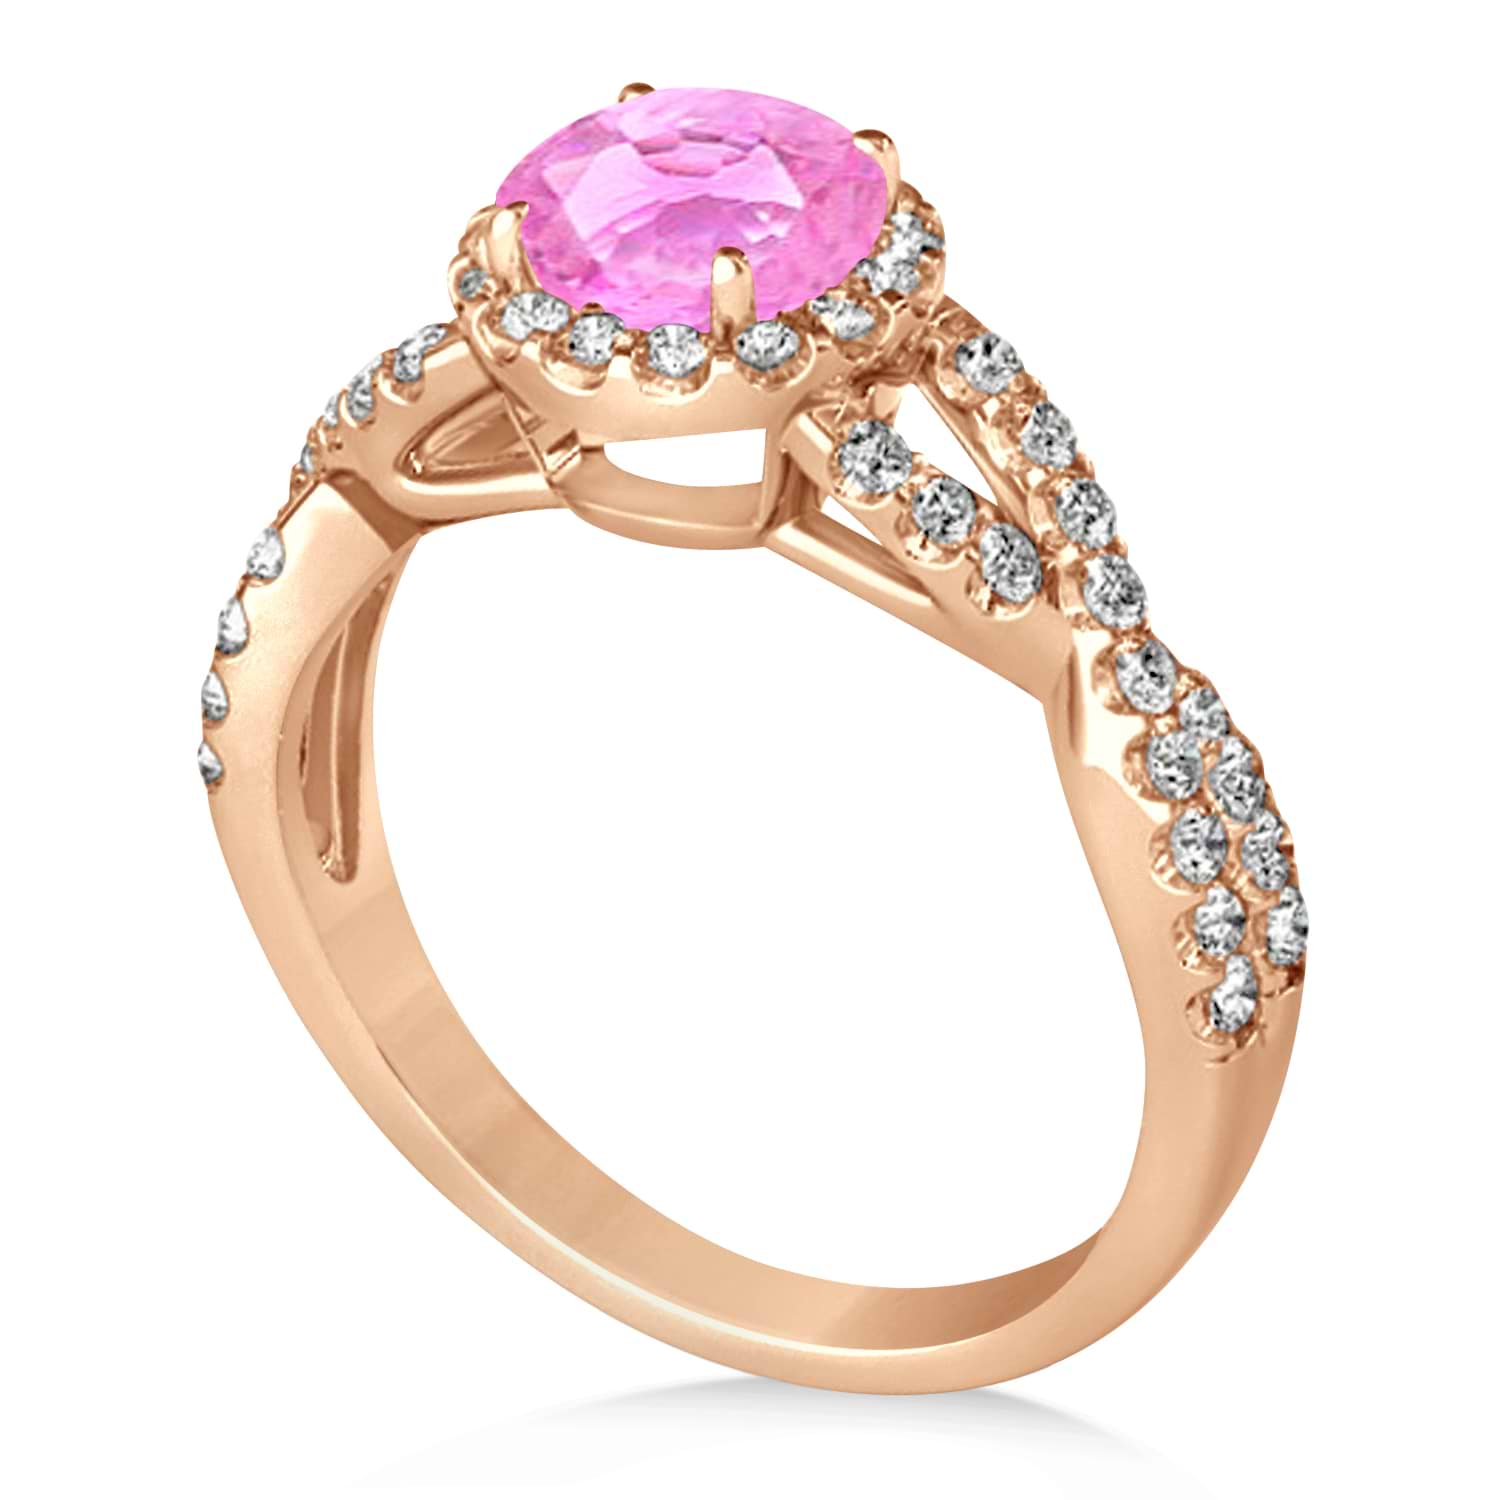 Pink Sapphire & Diamond Twisted Engagement Ring 18k Rose Gold 1.55ct